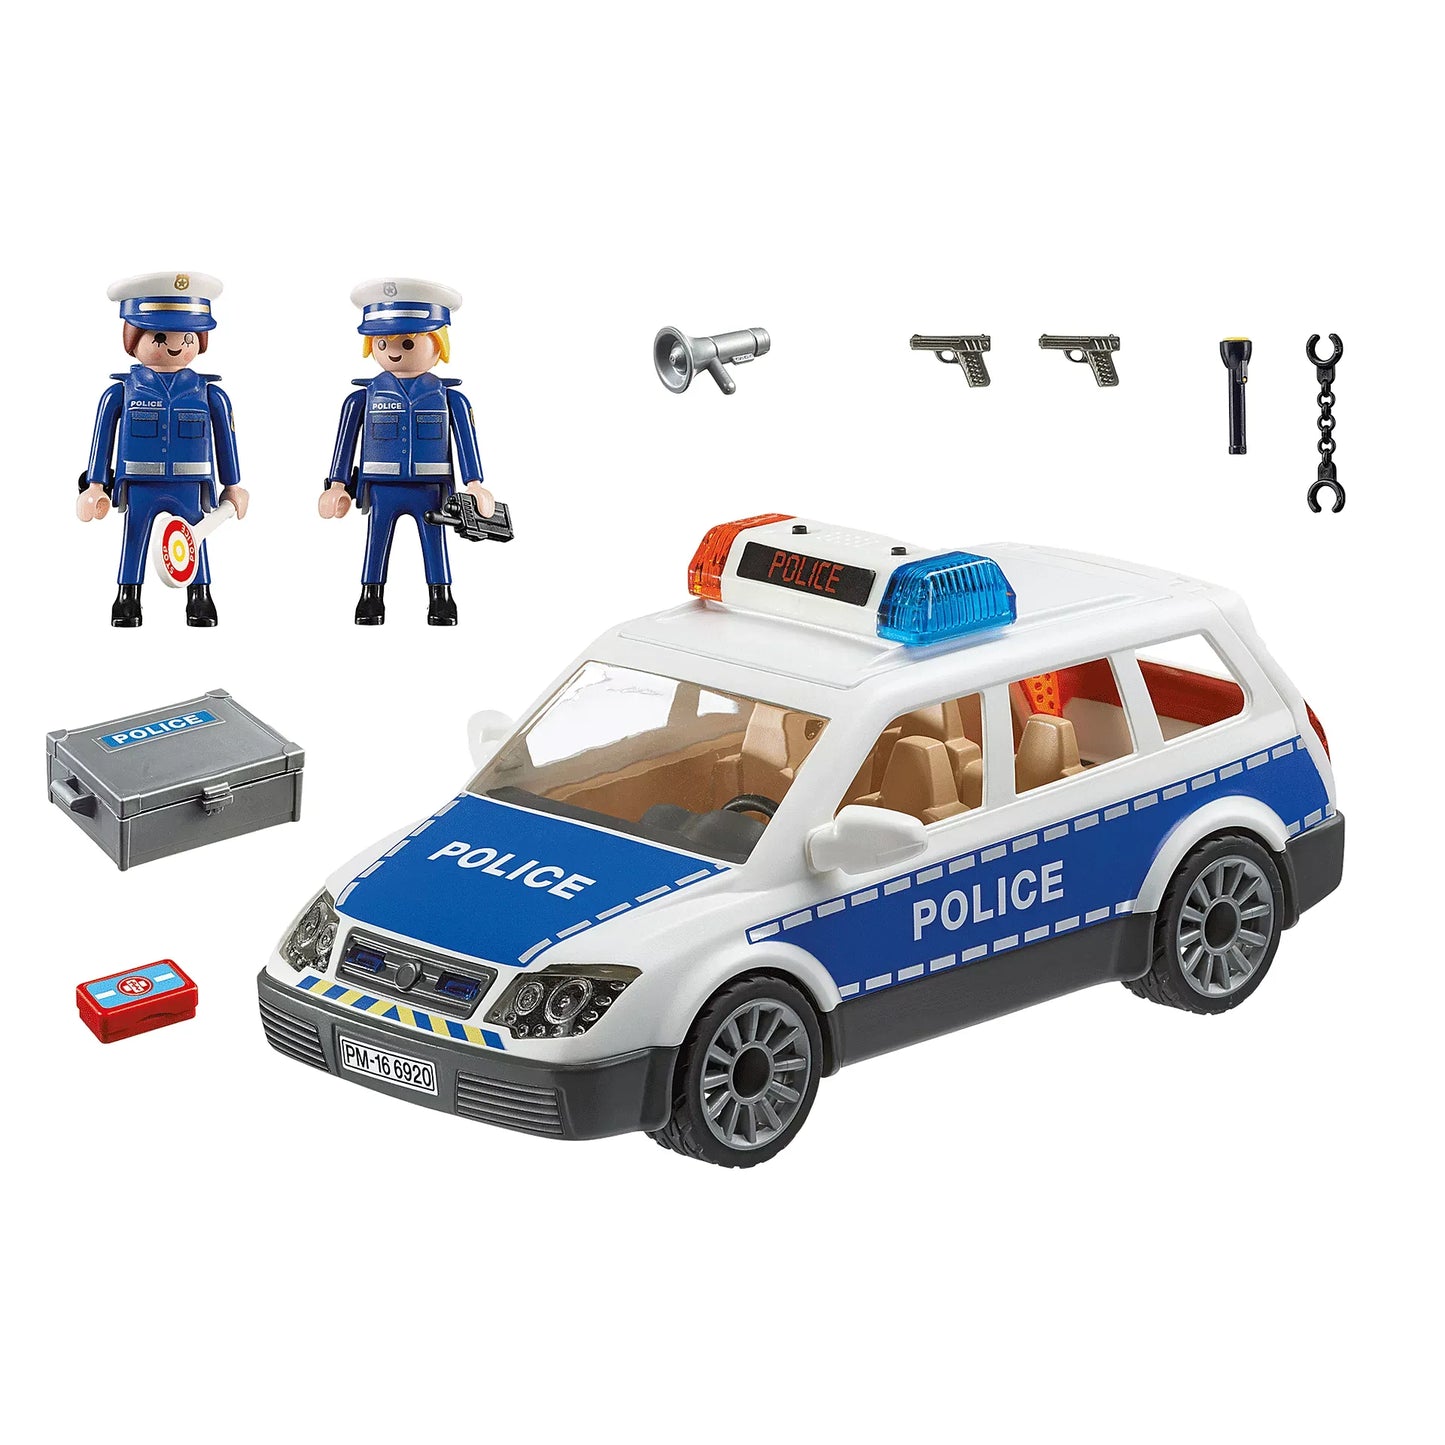 City Action Police Emergency Vehicle